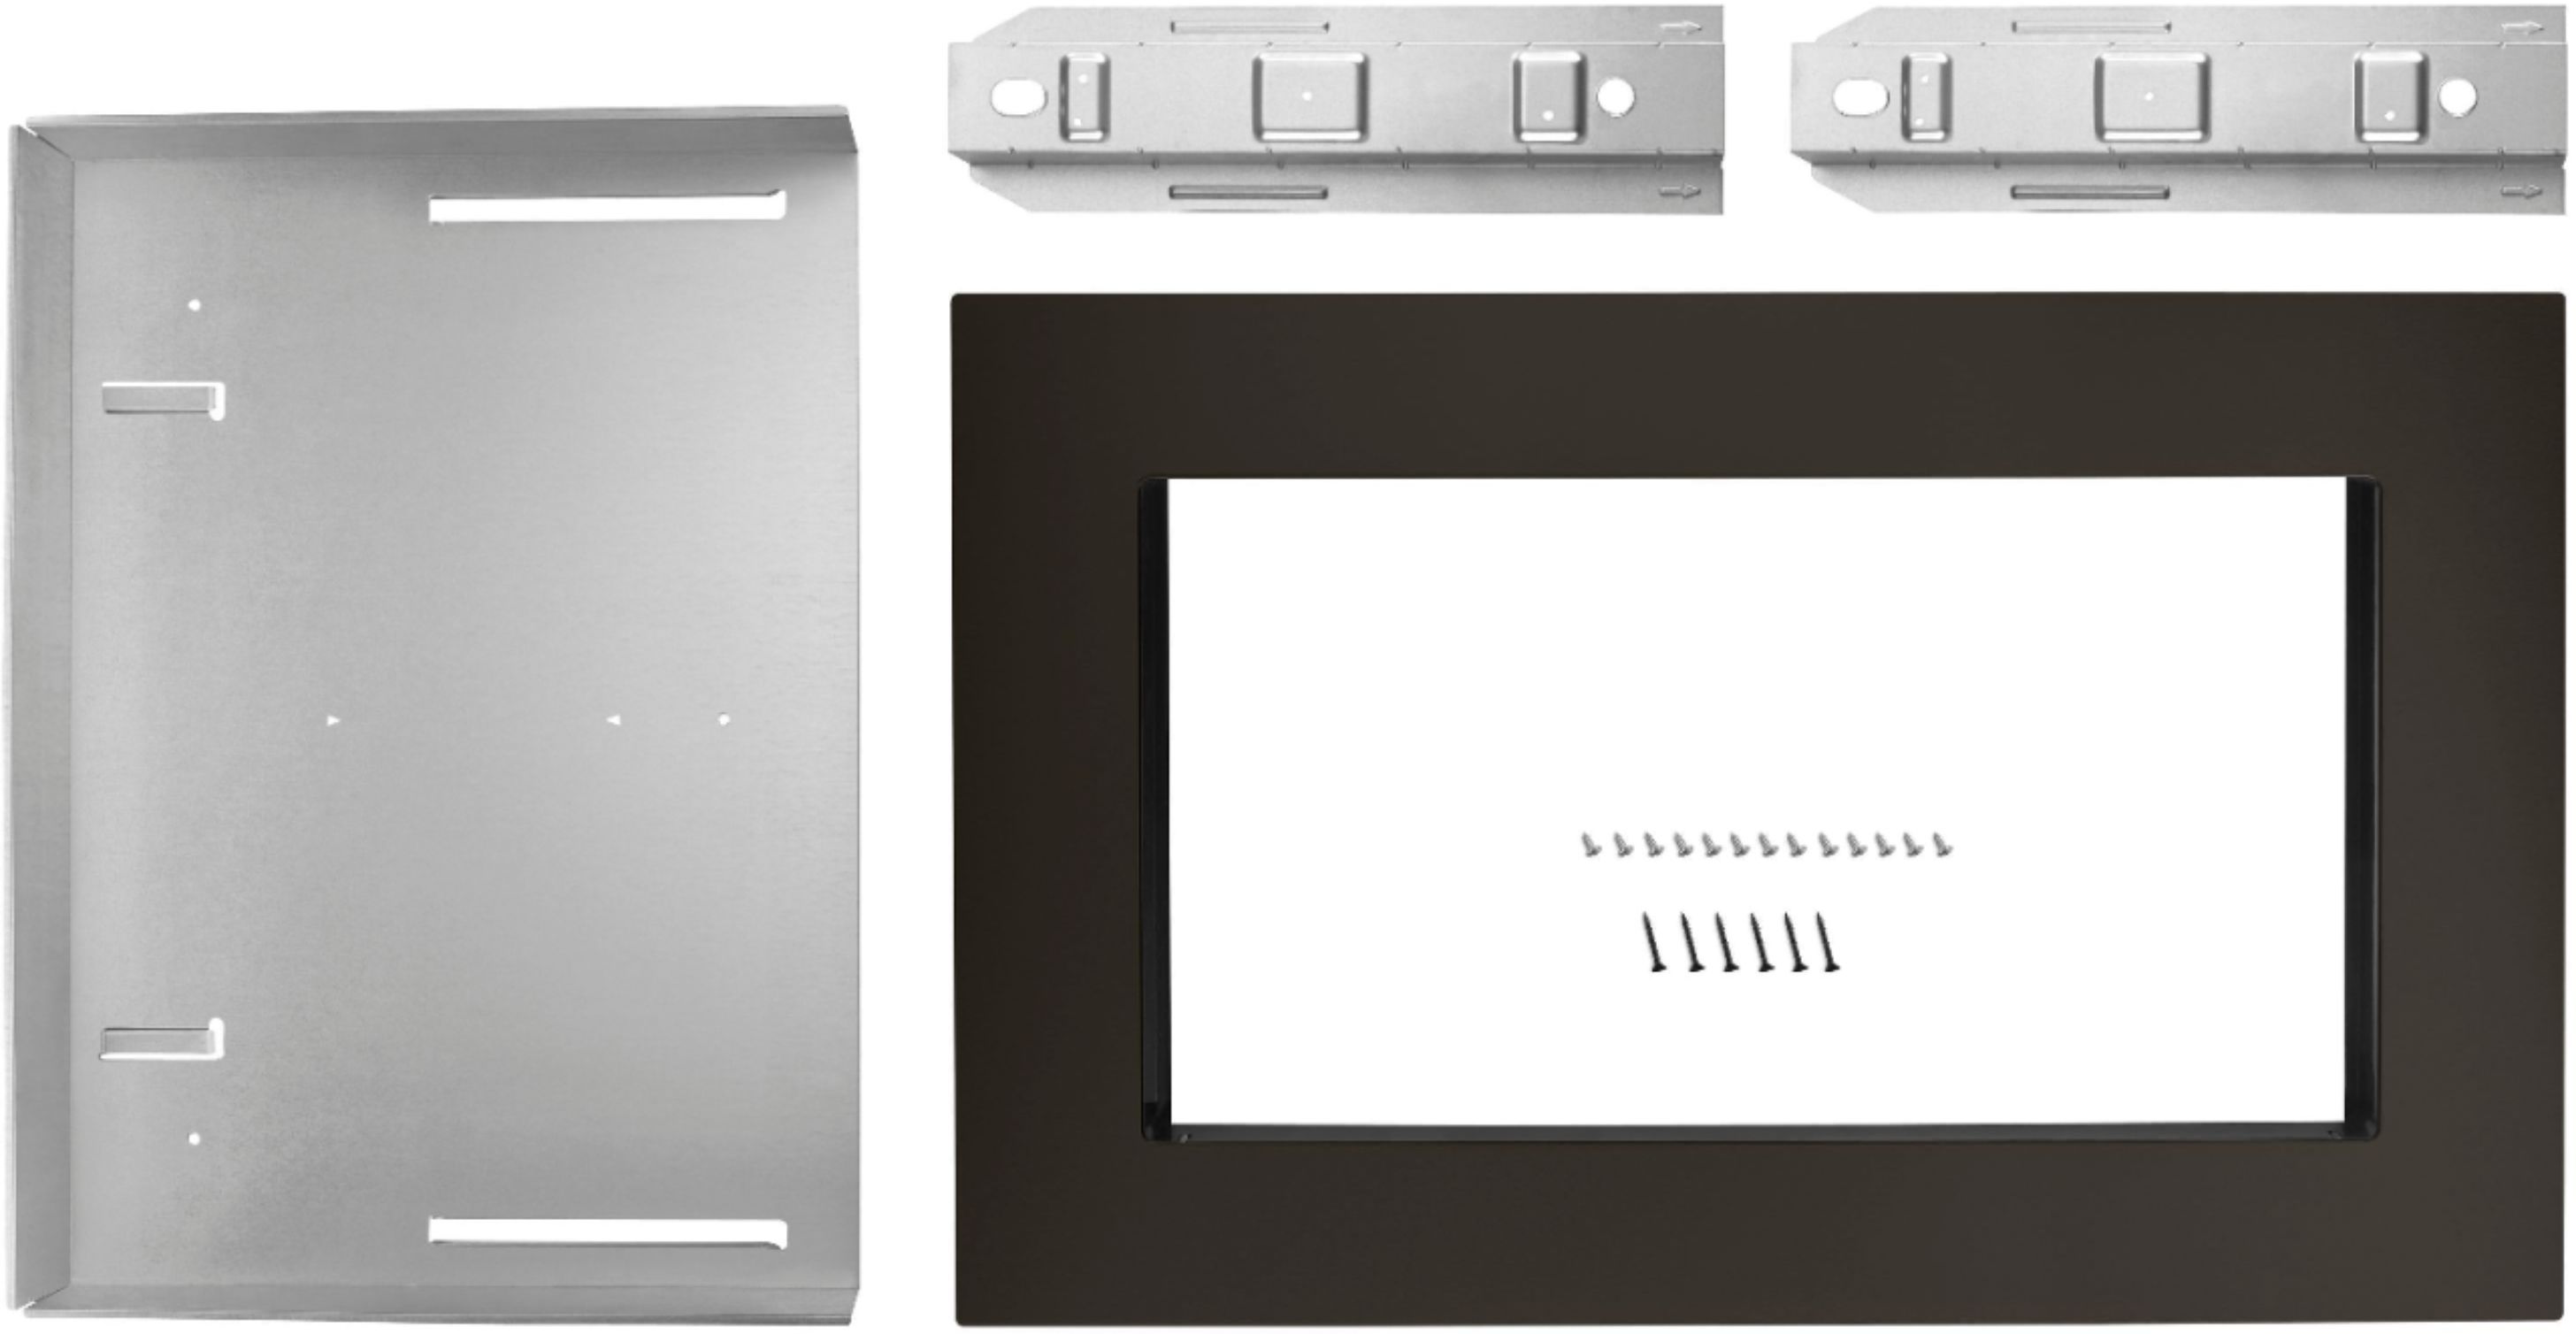 27 Trim Kit For Whirlpool 2 2 Cu Ft Countertop Microwave Ovens